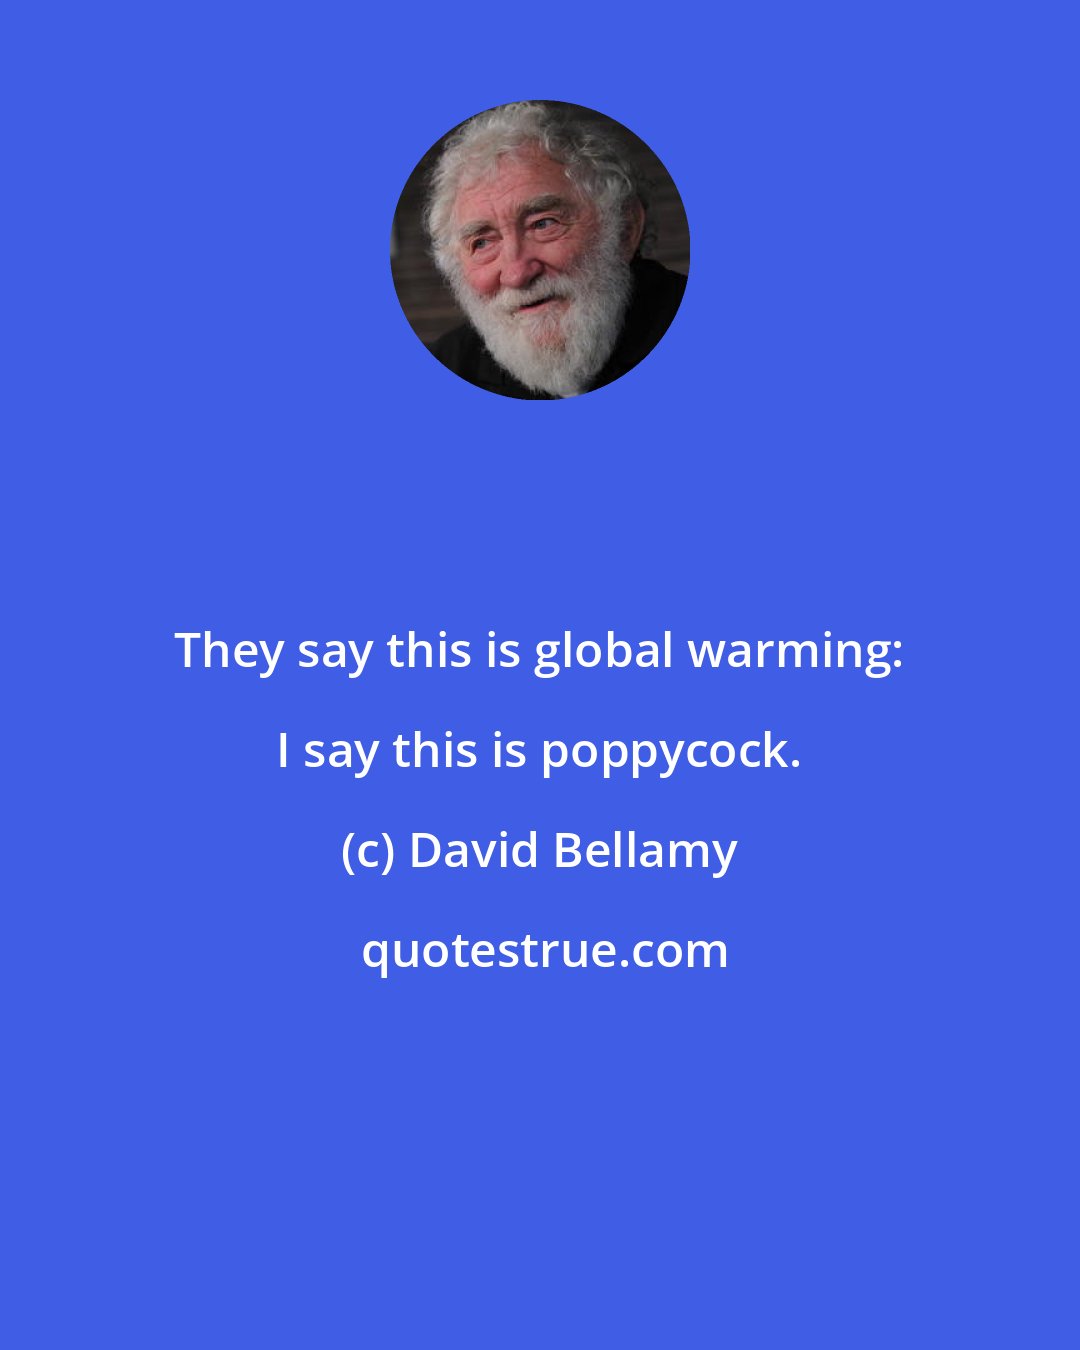 David Bellamy: They say this is global warming: I say this is poppycock.